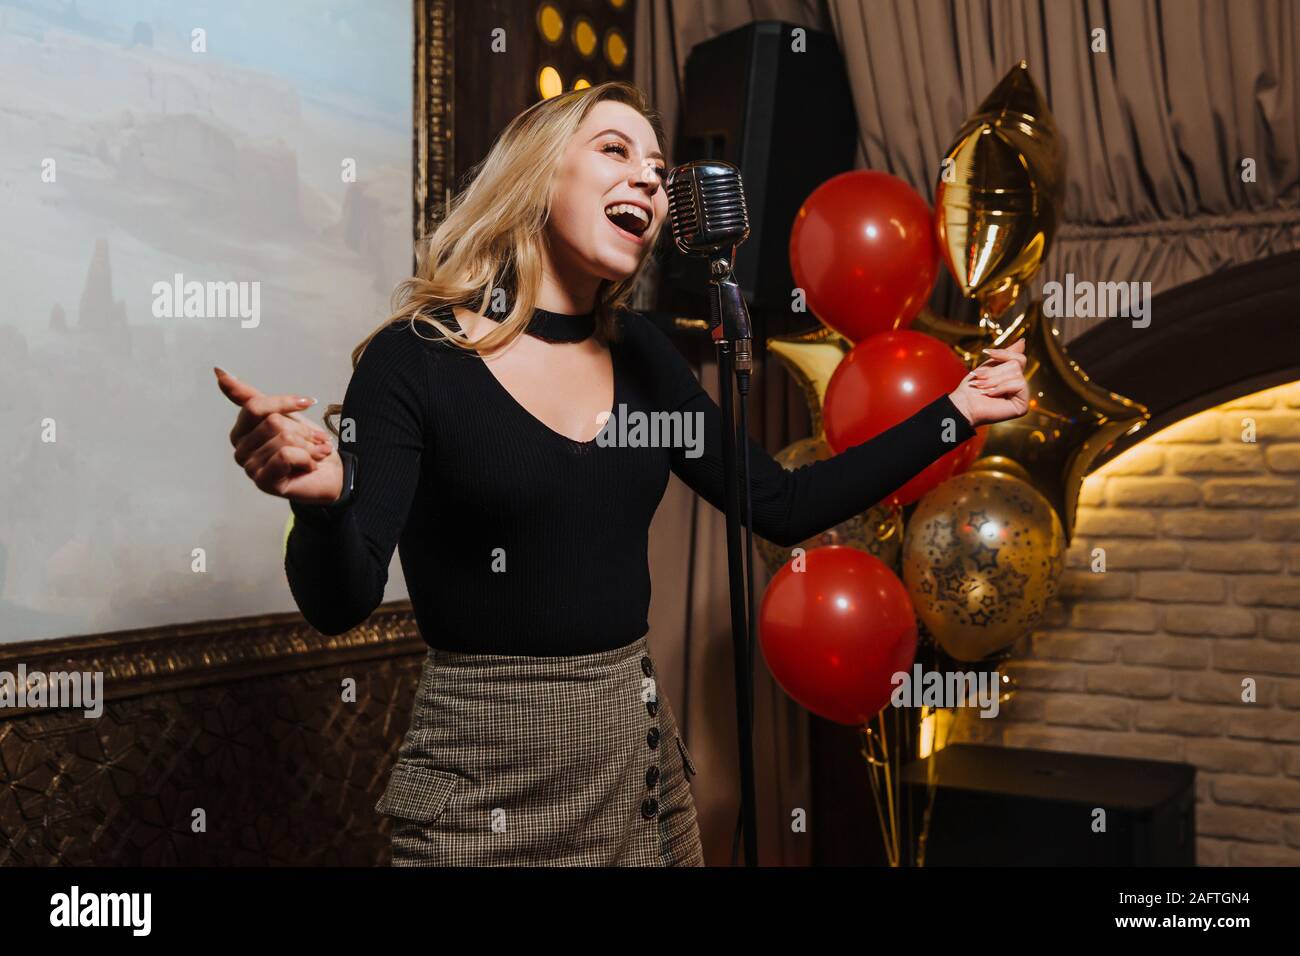 A beautiful young girl very energetically performs a beautiful karaoke song in a nightclub. Stock Photo